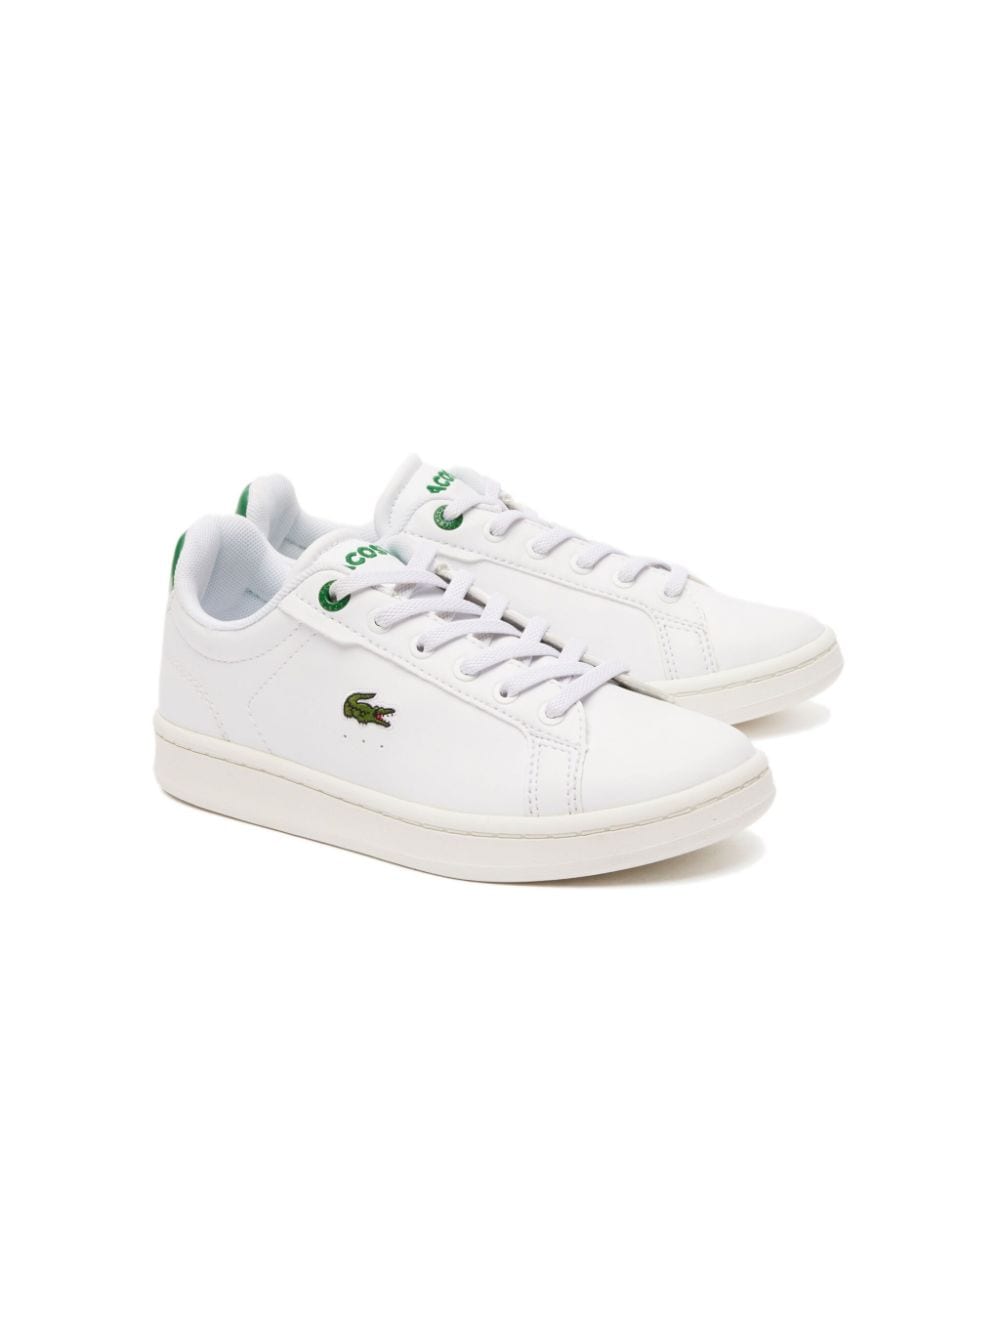 Lacoste Kids Carnaby Pro low-top sneakers White